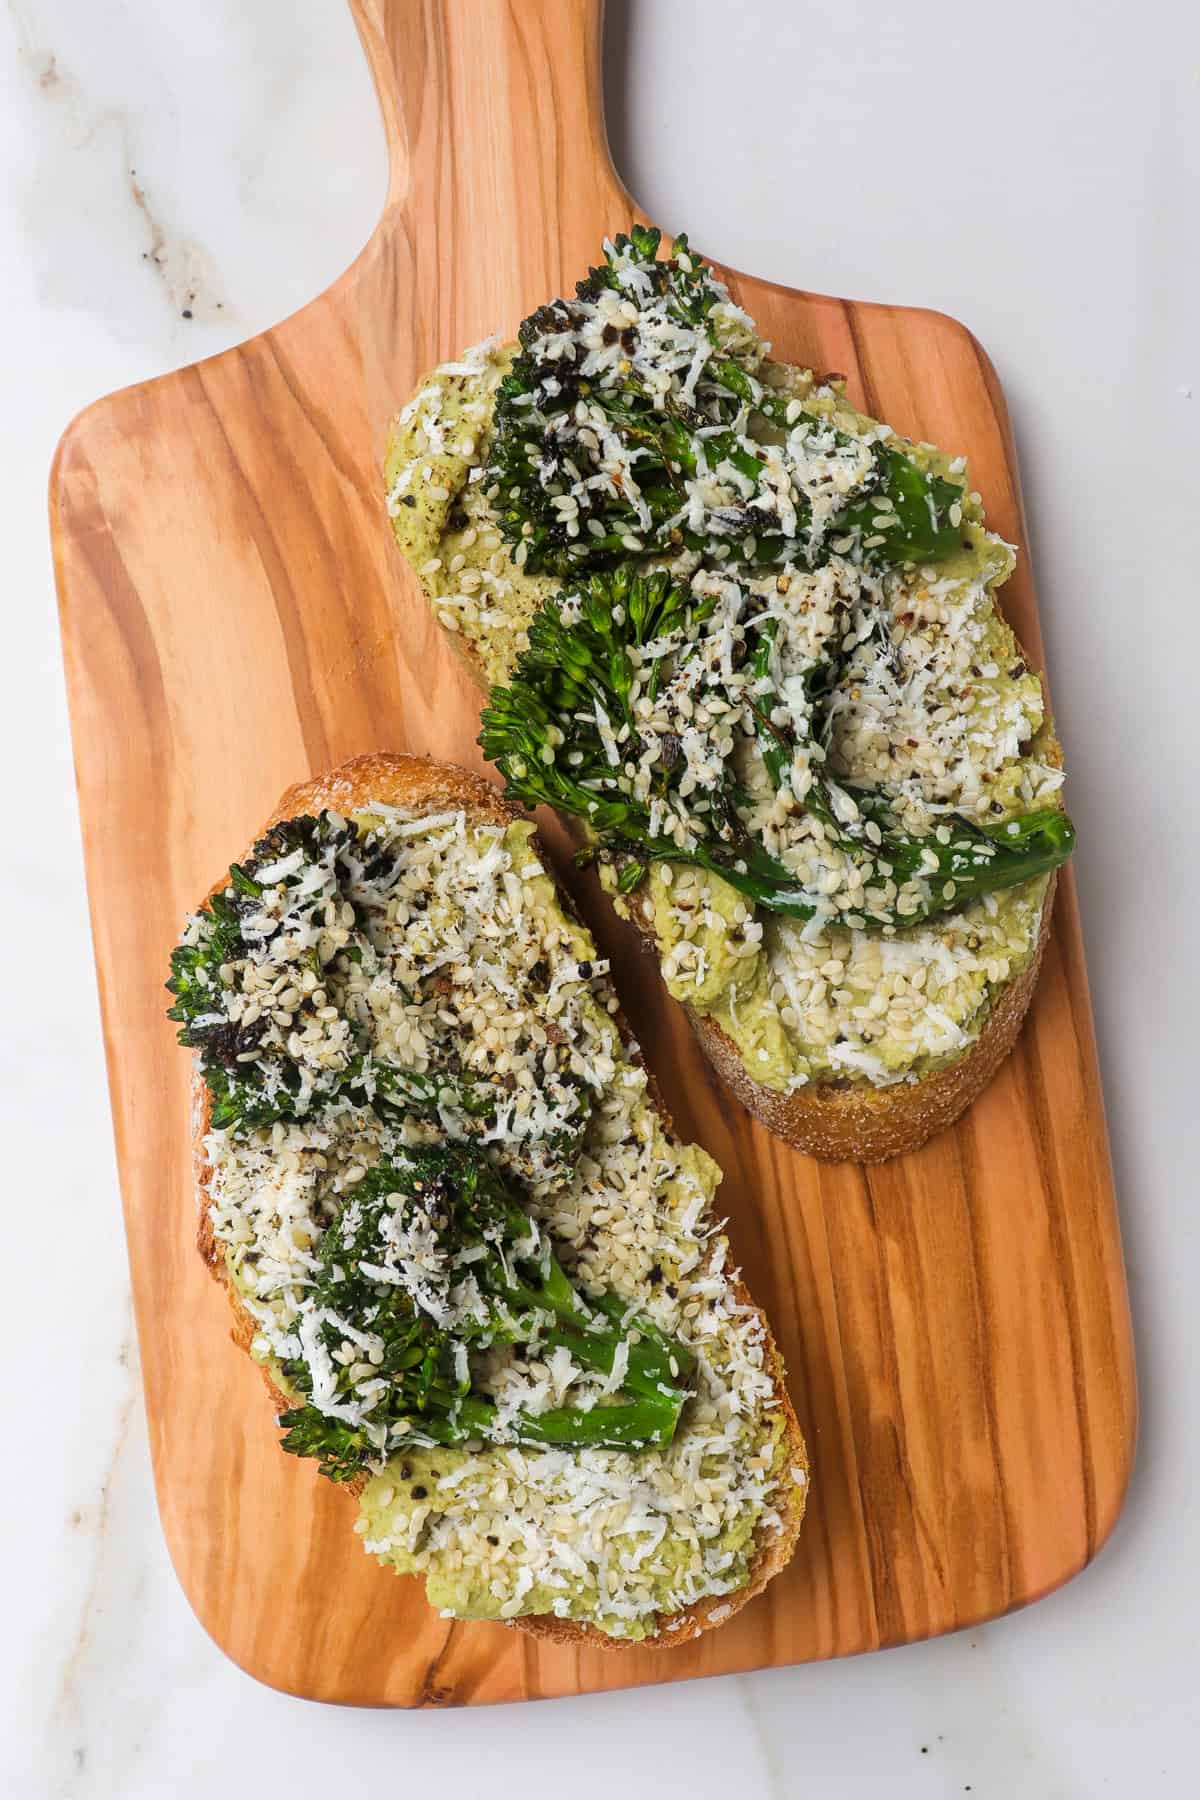 Cut up toast topped with broccoli hummus, broccolini and grated feta on wooden board.